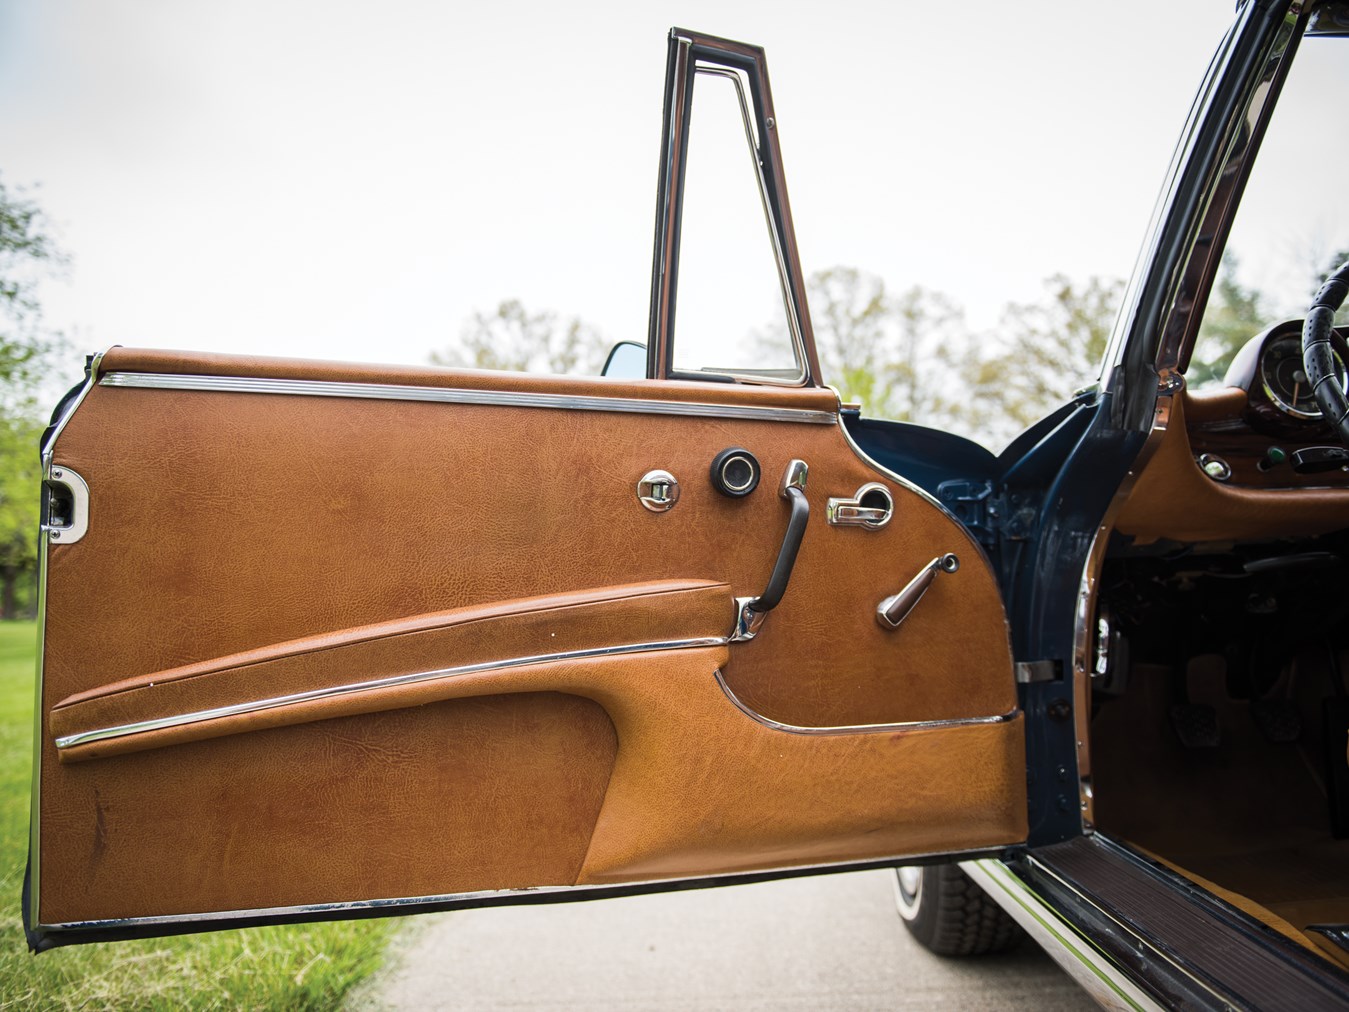 The leather in the door trims is both beautiful and functional.